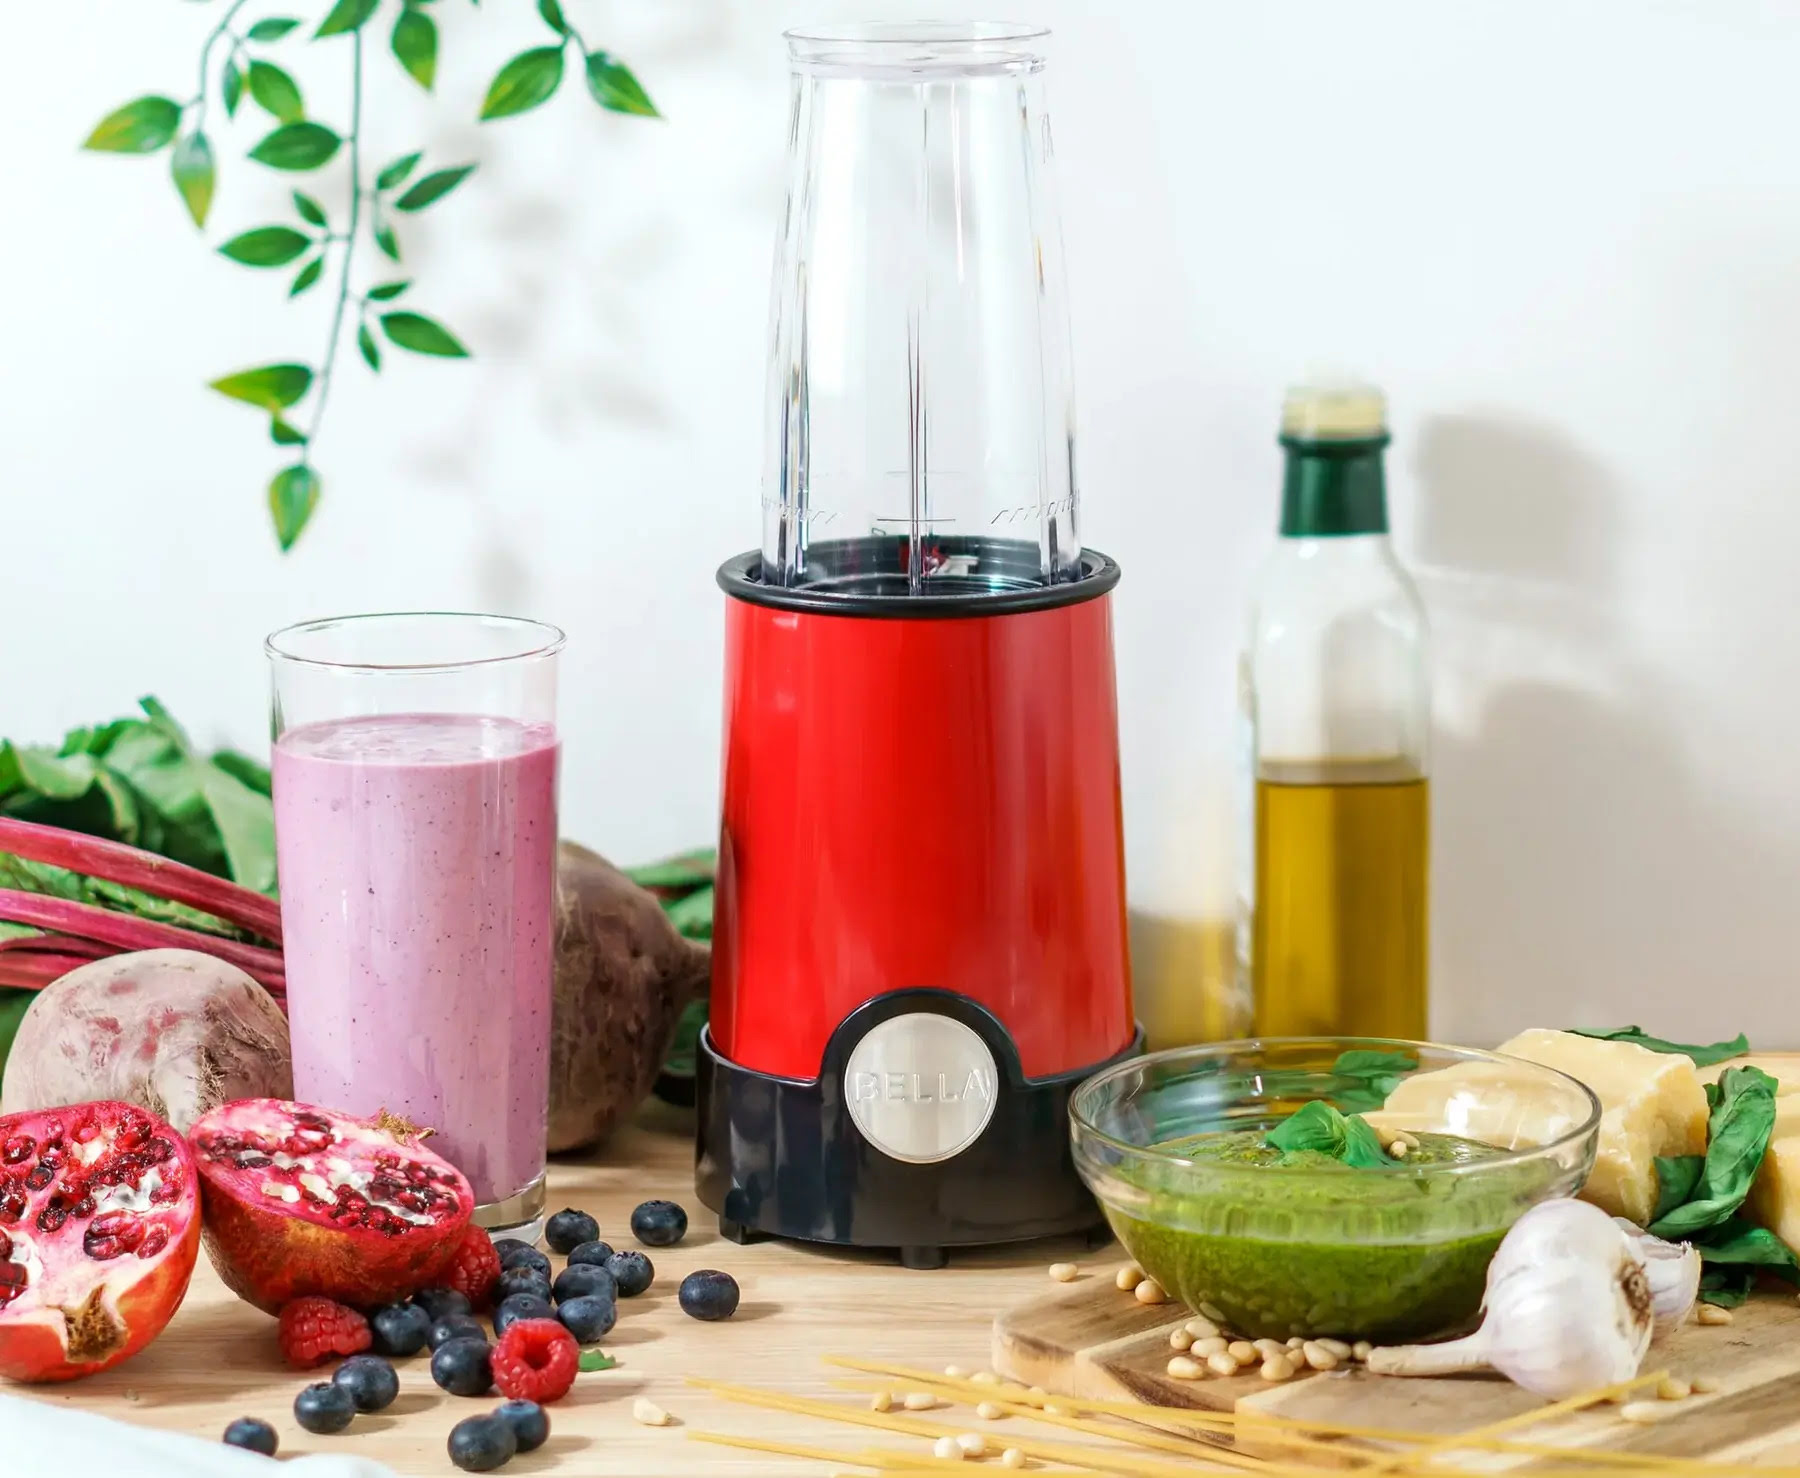 5 Easy Recipes to Make With a Rocket Blender - The Fitchen